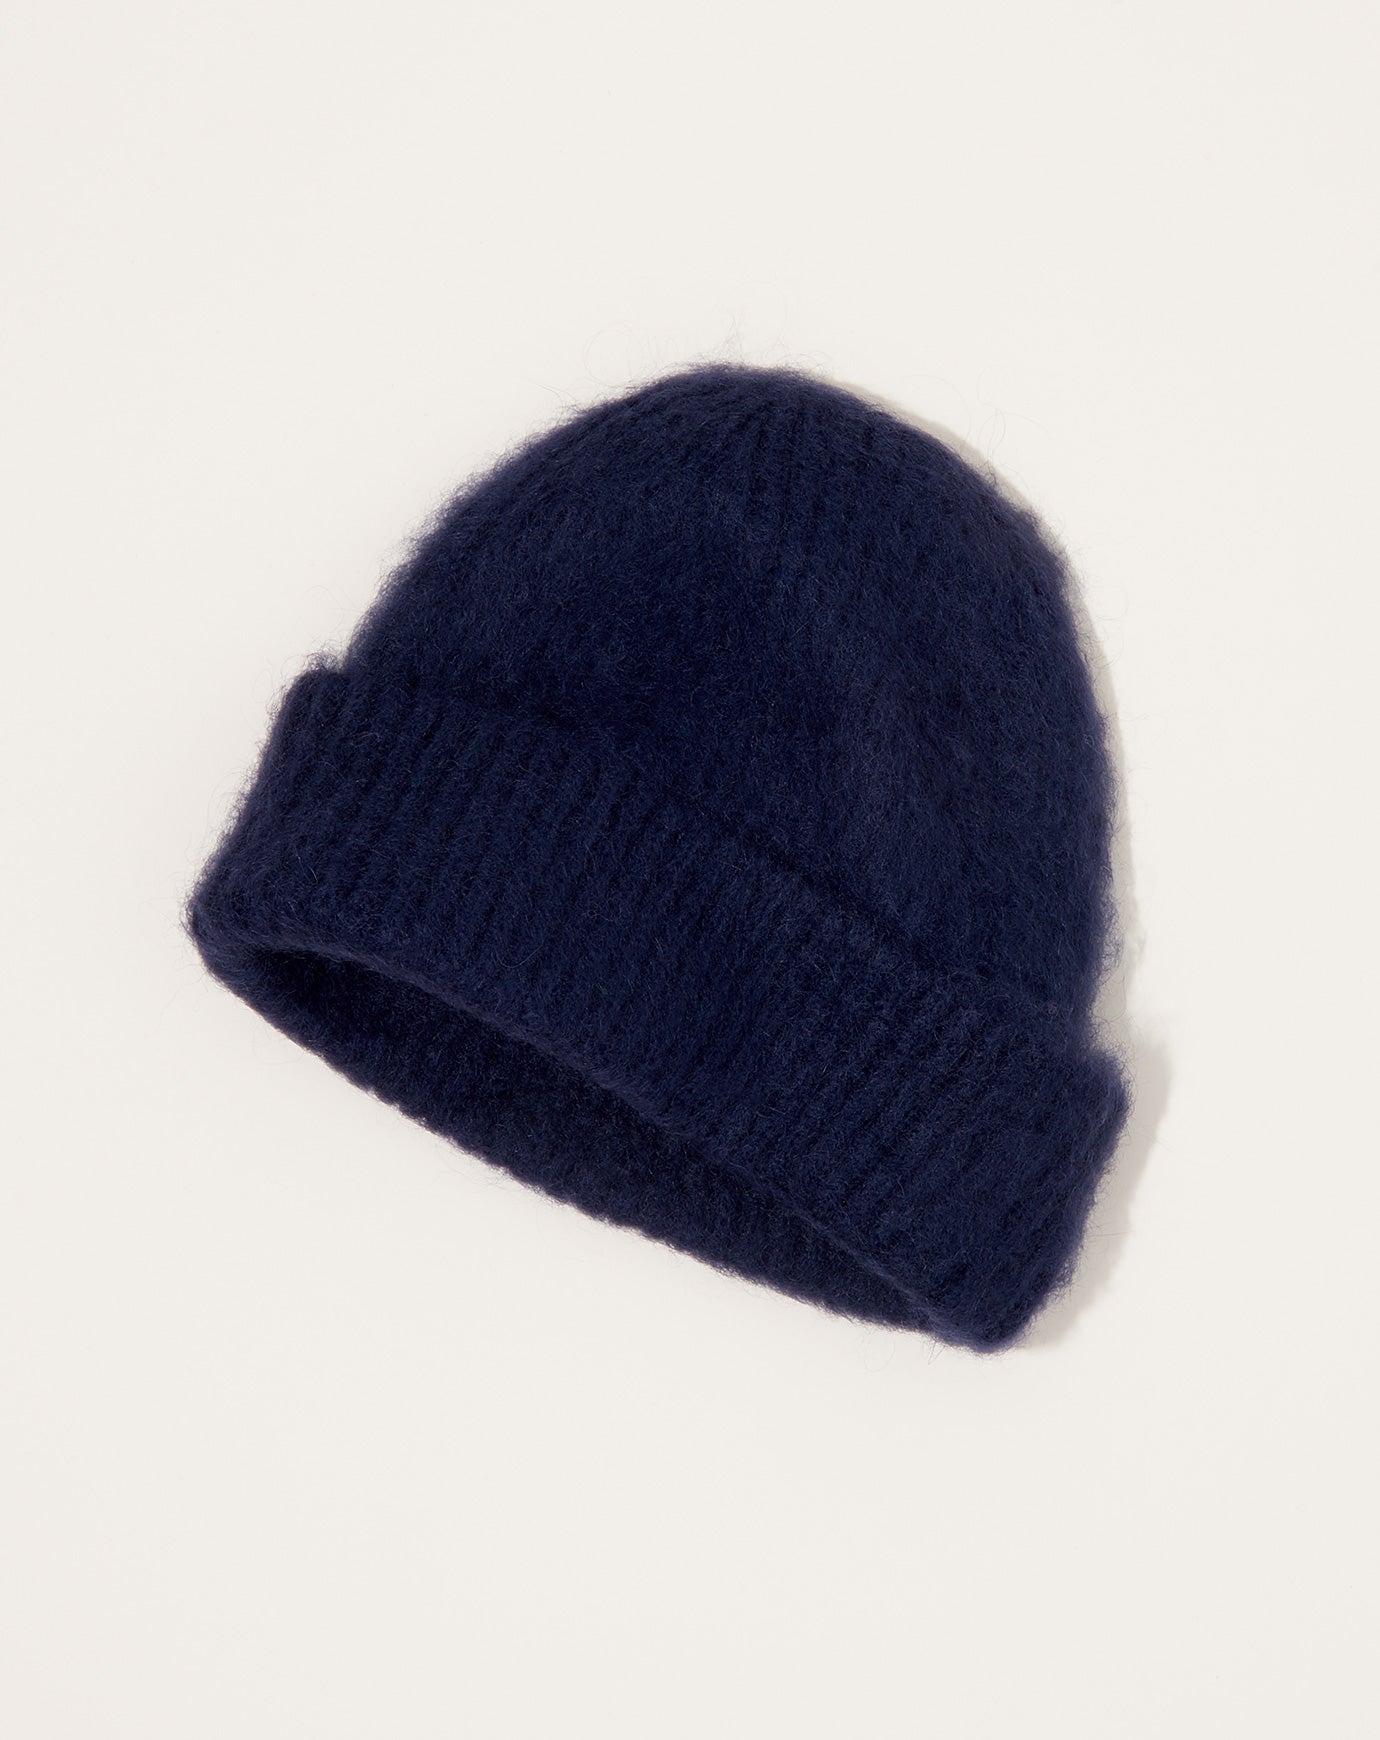 Exquisite J Mohair Wool Brushed Beanie in Blueberry